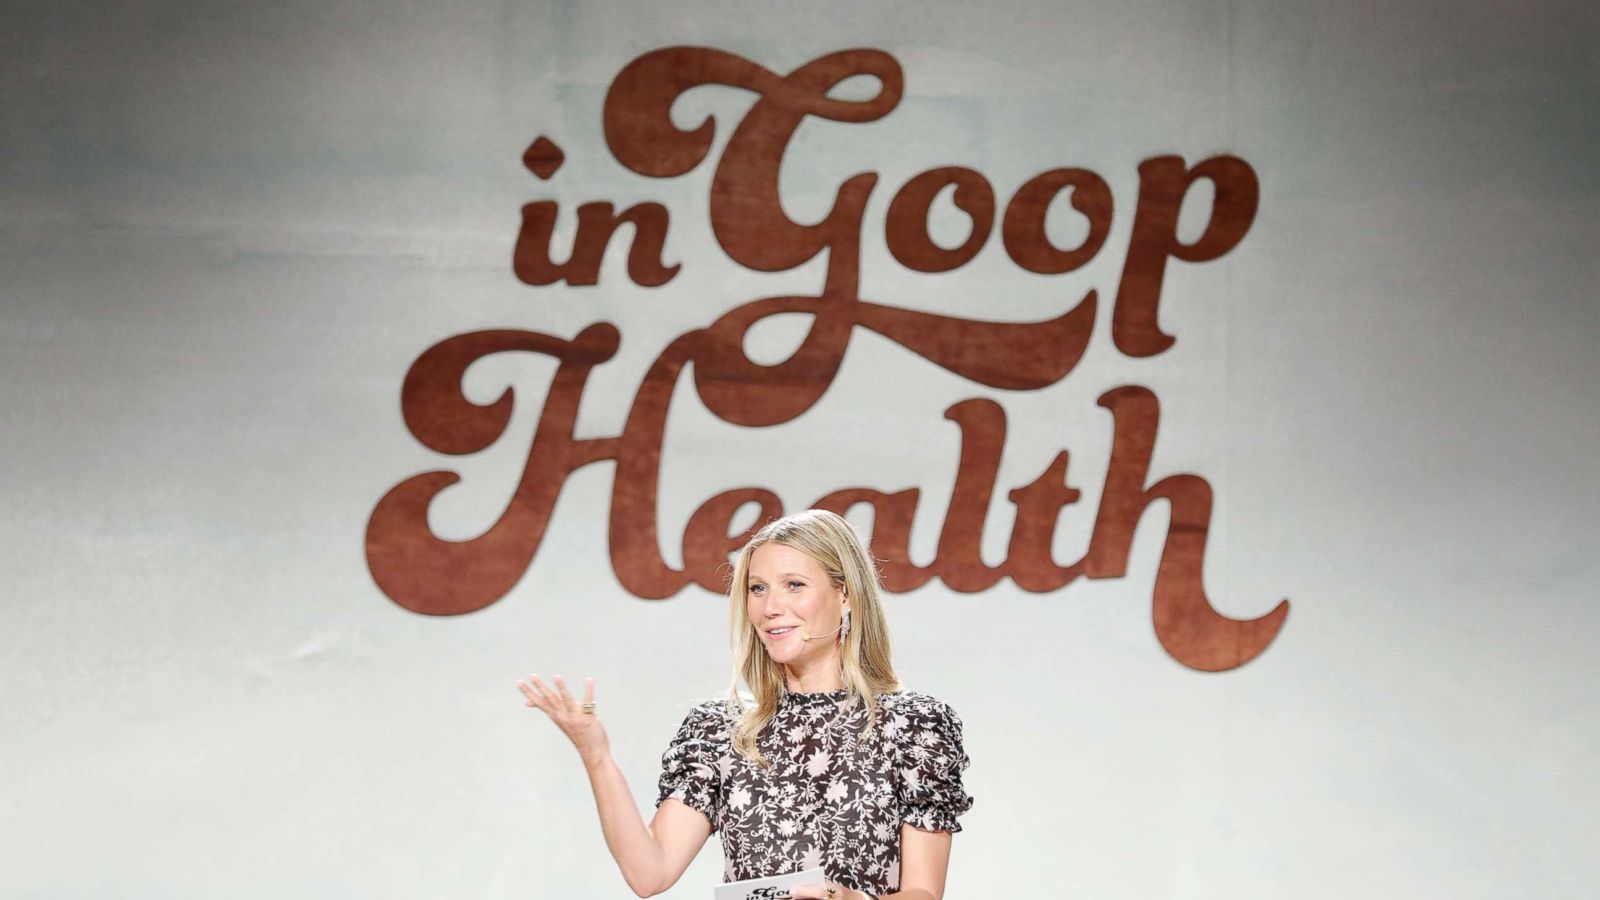 Gwyneth Paltrow and GOOP still want you to put a jade egg in your